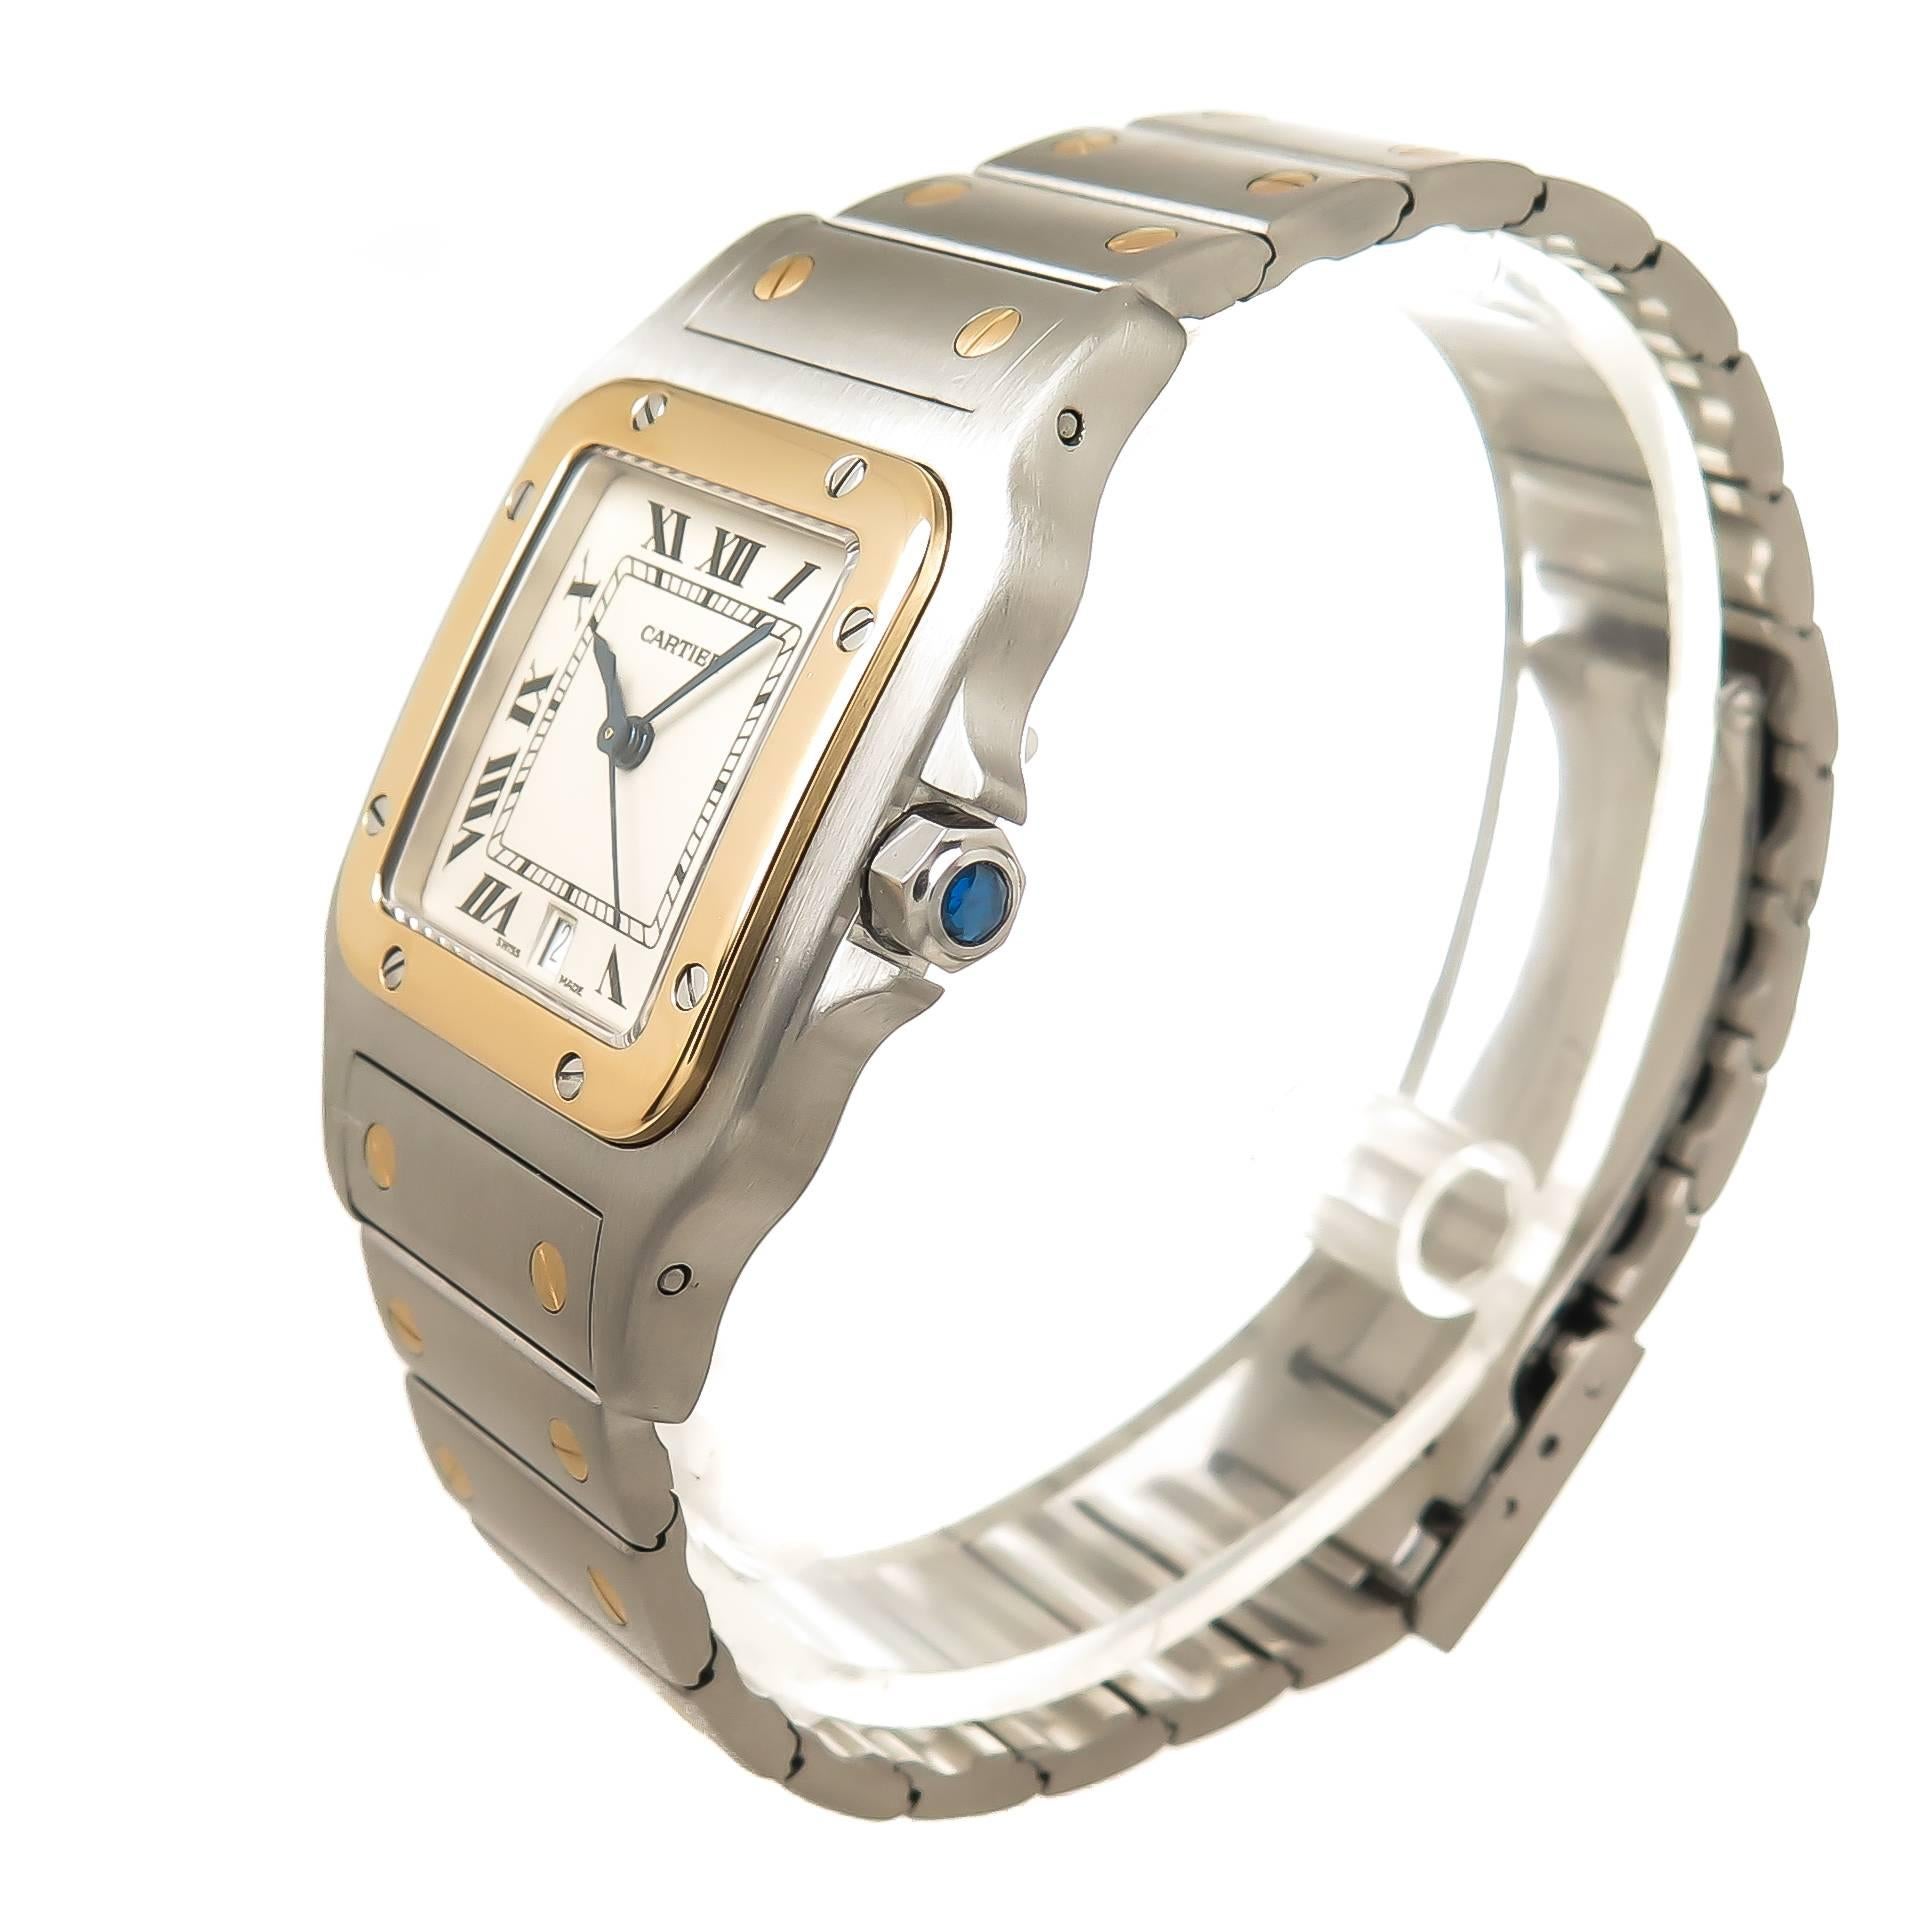 Circa 2000 Cartier Santos Gents Wrist watch, 41 X 30 MM Stainless Steel case with 18k Yellow Gold Bezel, quartz movement, White Dial with Black roman Numerals, sweep seconds hand, calendar window at the 6 position and a sapphire crown. 3/4 inch wide